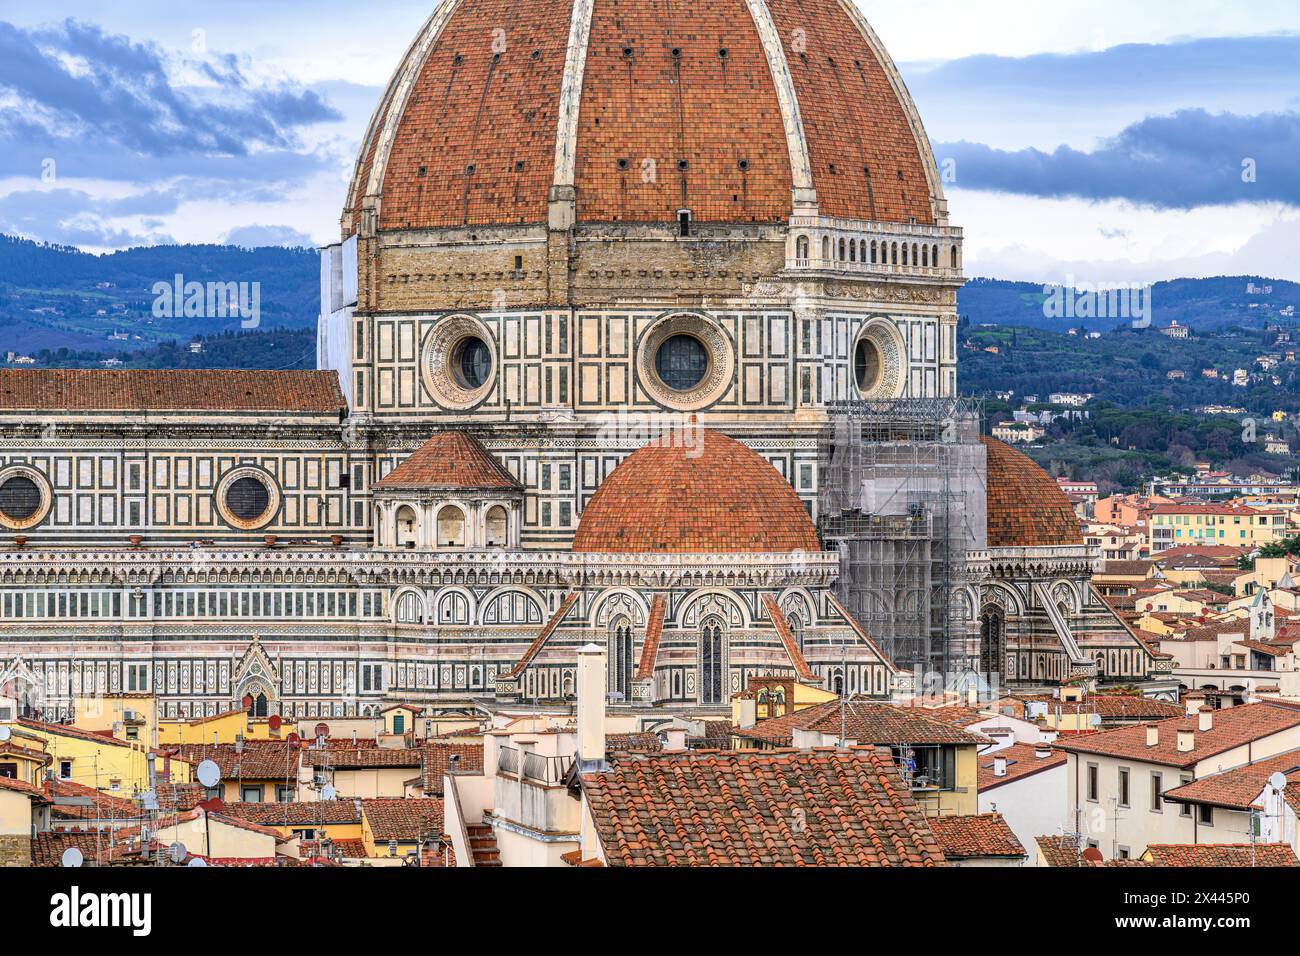 Cathedral of Santa Maria del Fiore, the Baptistery and Giotto's Bell Tower - the most iconic buildings in Florence. Shot from Torre di Arnolfo. Stock Photo